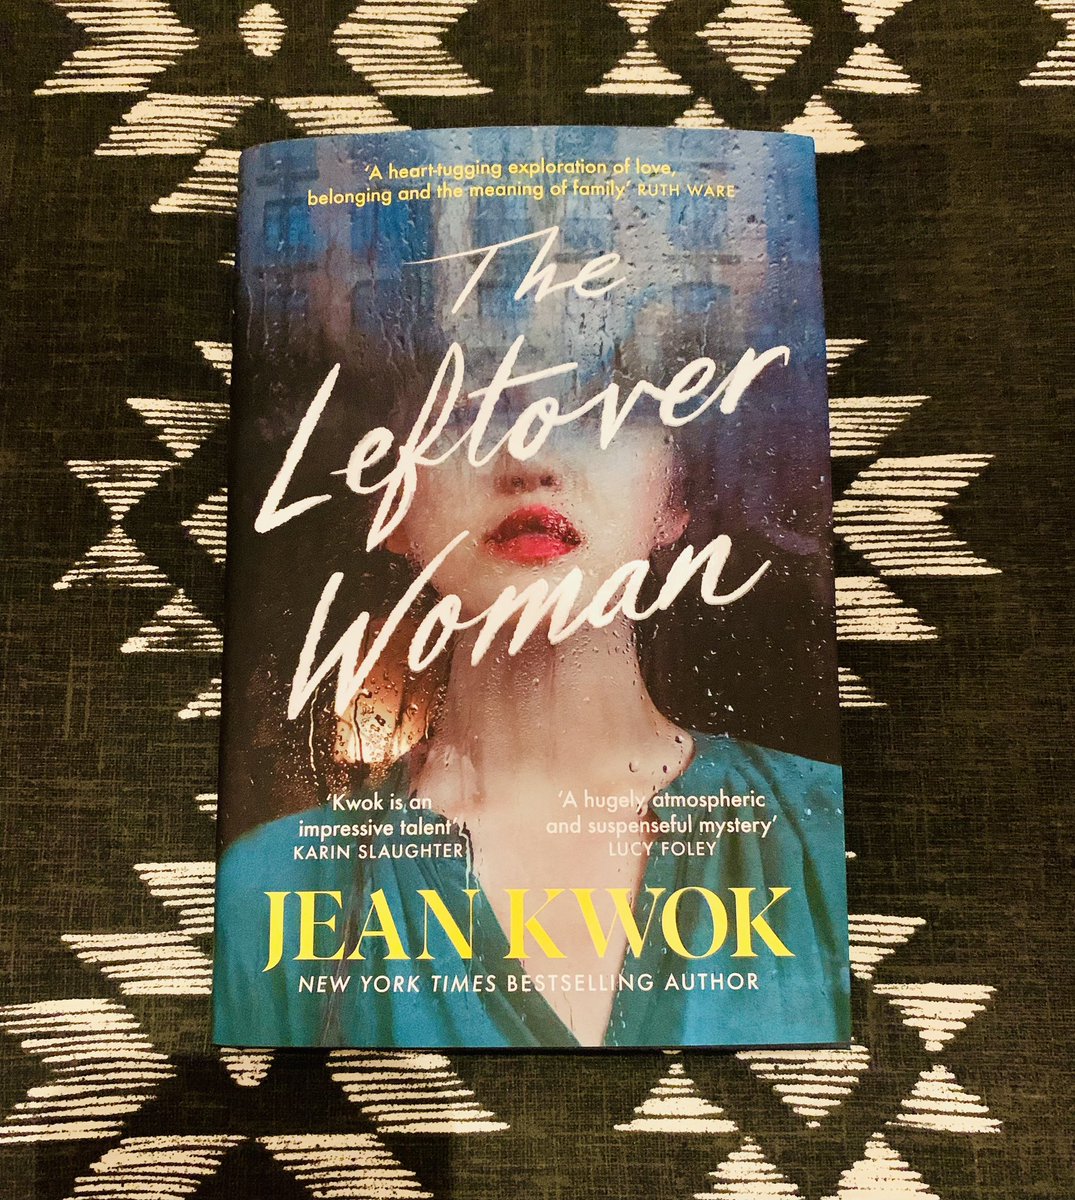 ✨Happy Publication Day!✨

#TheLeftoverWoman by @JeanKwok - looking forward to starting this “hugely atmospheric and suspenseful mystery” read.

A big thanks to @RachelMayQuin for this stunning copy.

💫 Out Now from @ViperBooks 💫